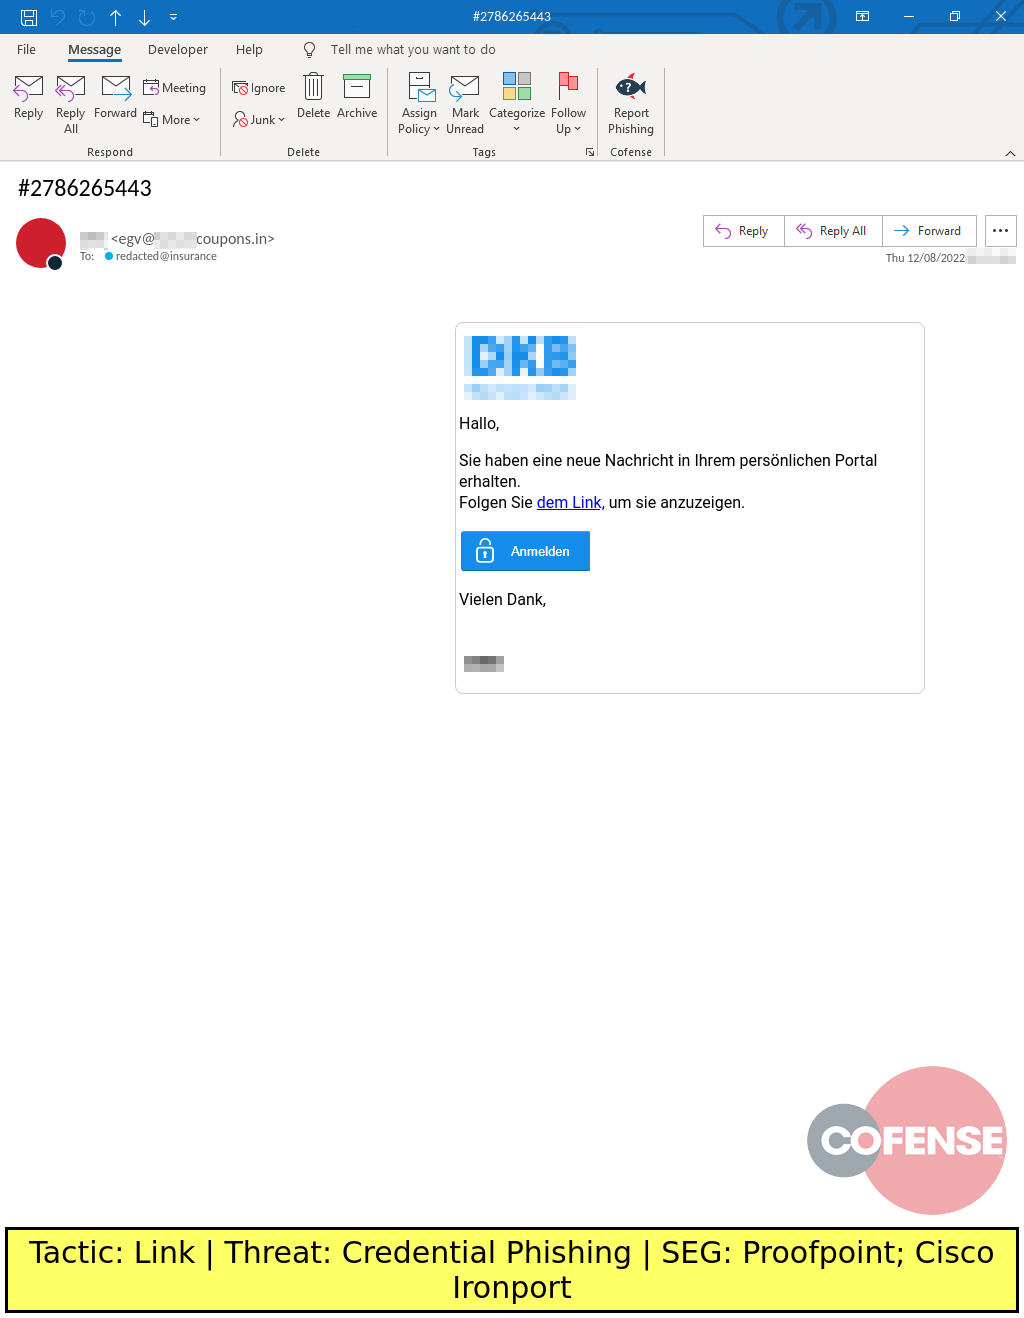 Real Phishing Example: DKB-spoofing emails found in environments protected by Proofpoint and Cisco Ironport deliver Credential Phishing via an embedded URL.